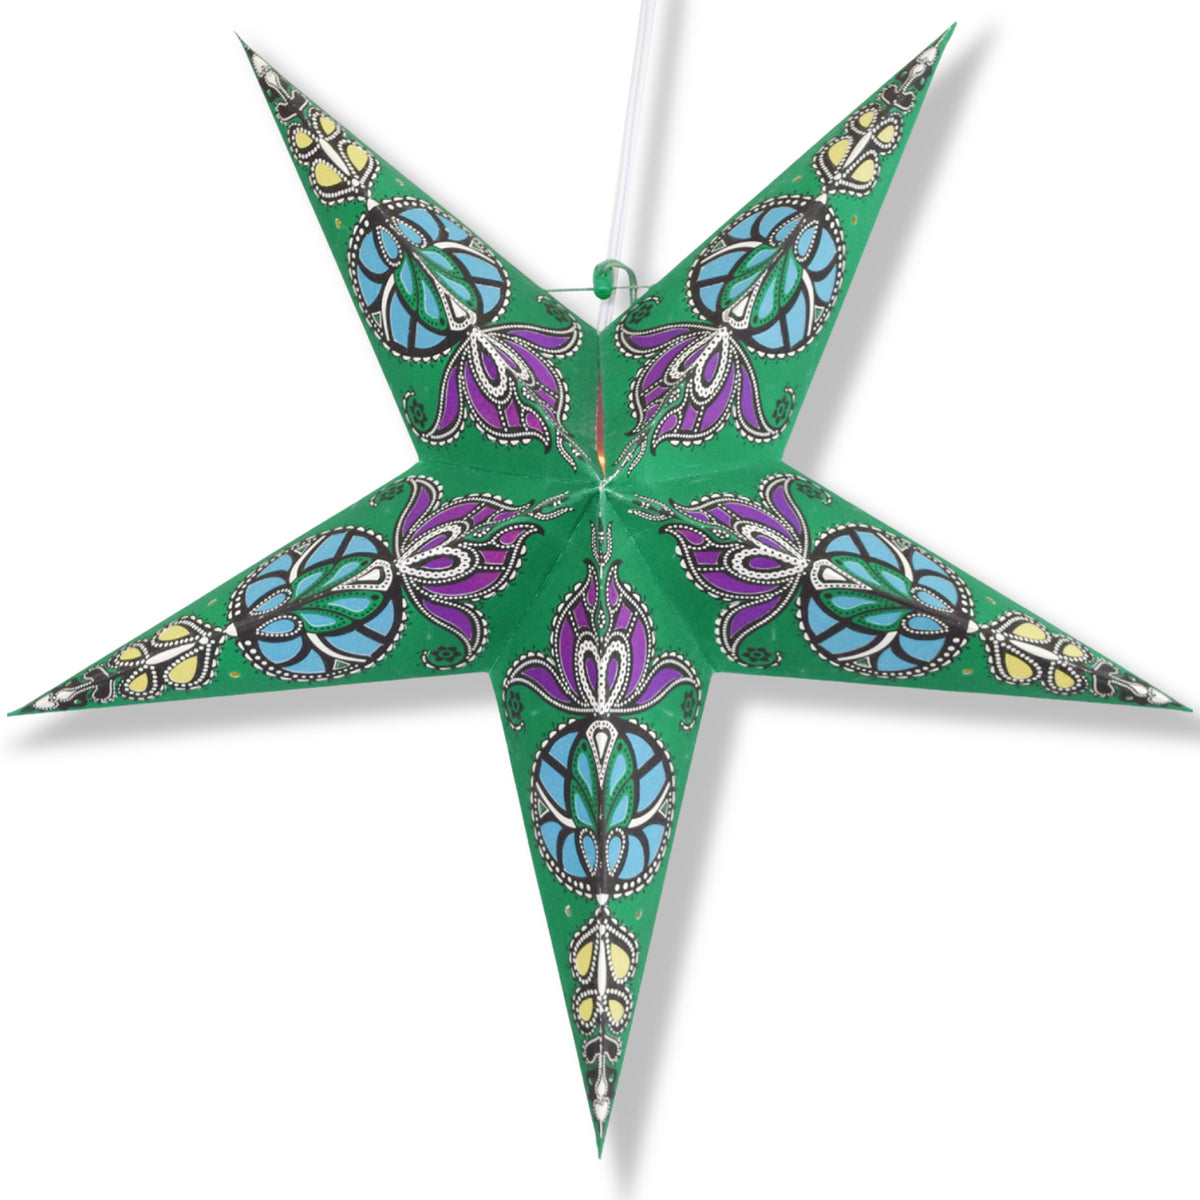 24&quot; Green Neptune Paper Star Lantern, Chinese Hanging Wedding &amp; Party Decoration